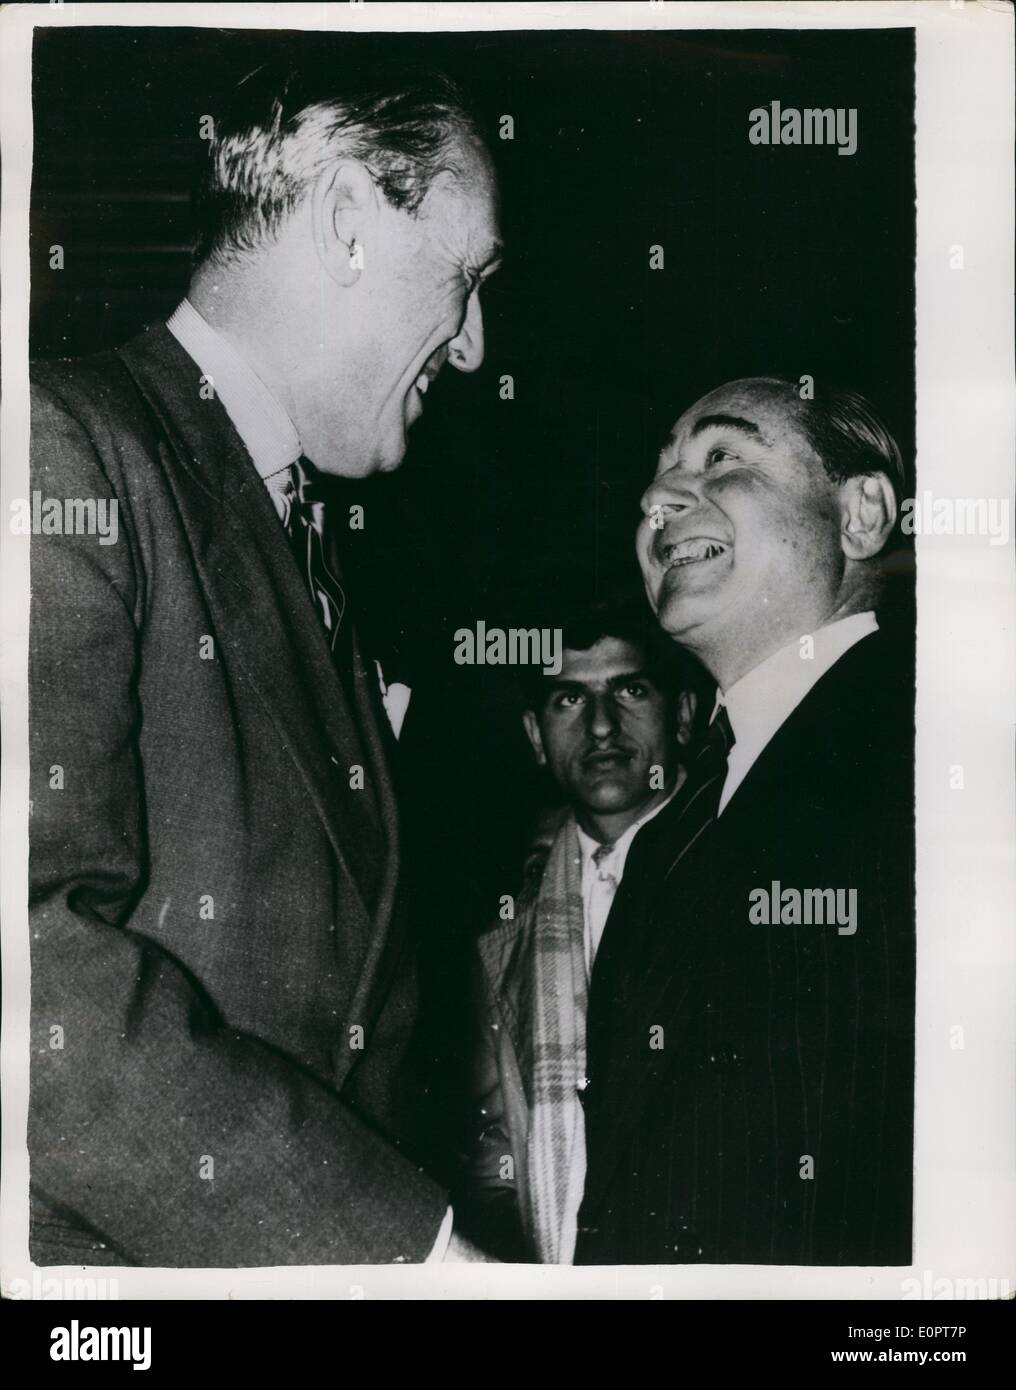 Dec. 12, 1956 - Colonial Secretary has talks with Turkish Prime Minister in Istanbul: Mr. Alan Lennox-Boyd the Colonial Secretary had a meeting in Istanbul yesterday with Mr. Adnan Menderes the Prime Minister of Turkey. The Turks have asked for stronger measures to be taken against the Cyprus terrorists. Photo shows Mr. Adnan Mederes with Mr. Alan Lennox Boyd - when they met in Istanbul. Stock Photo